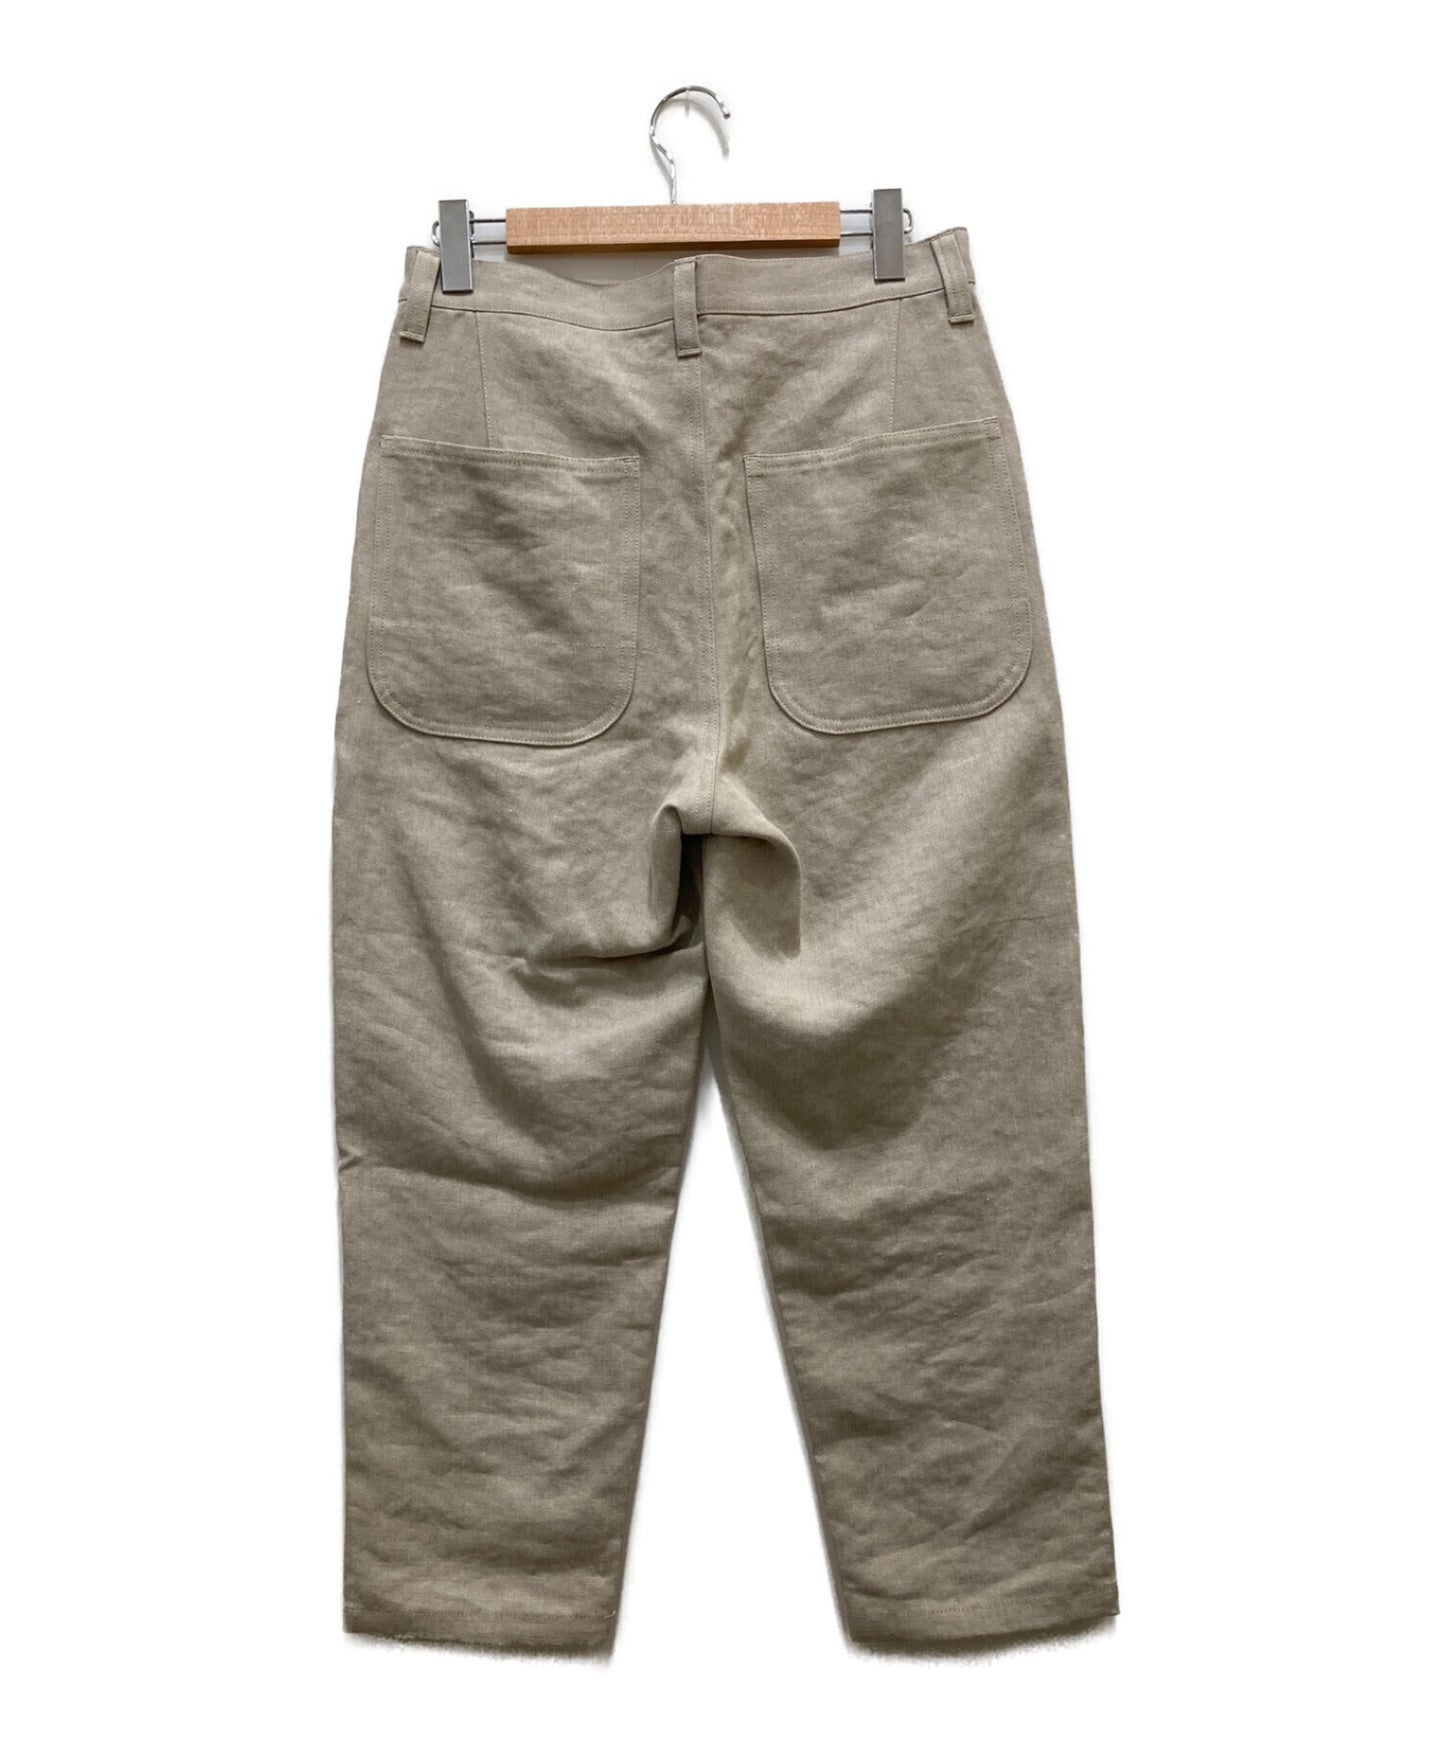 [Pre-owned] COMME des GARCONS JUNYA WATANABE MAN Linen tapered pants wq-p010 / ad2015 / 16ss